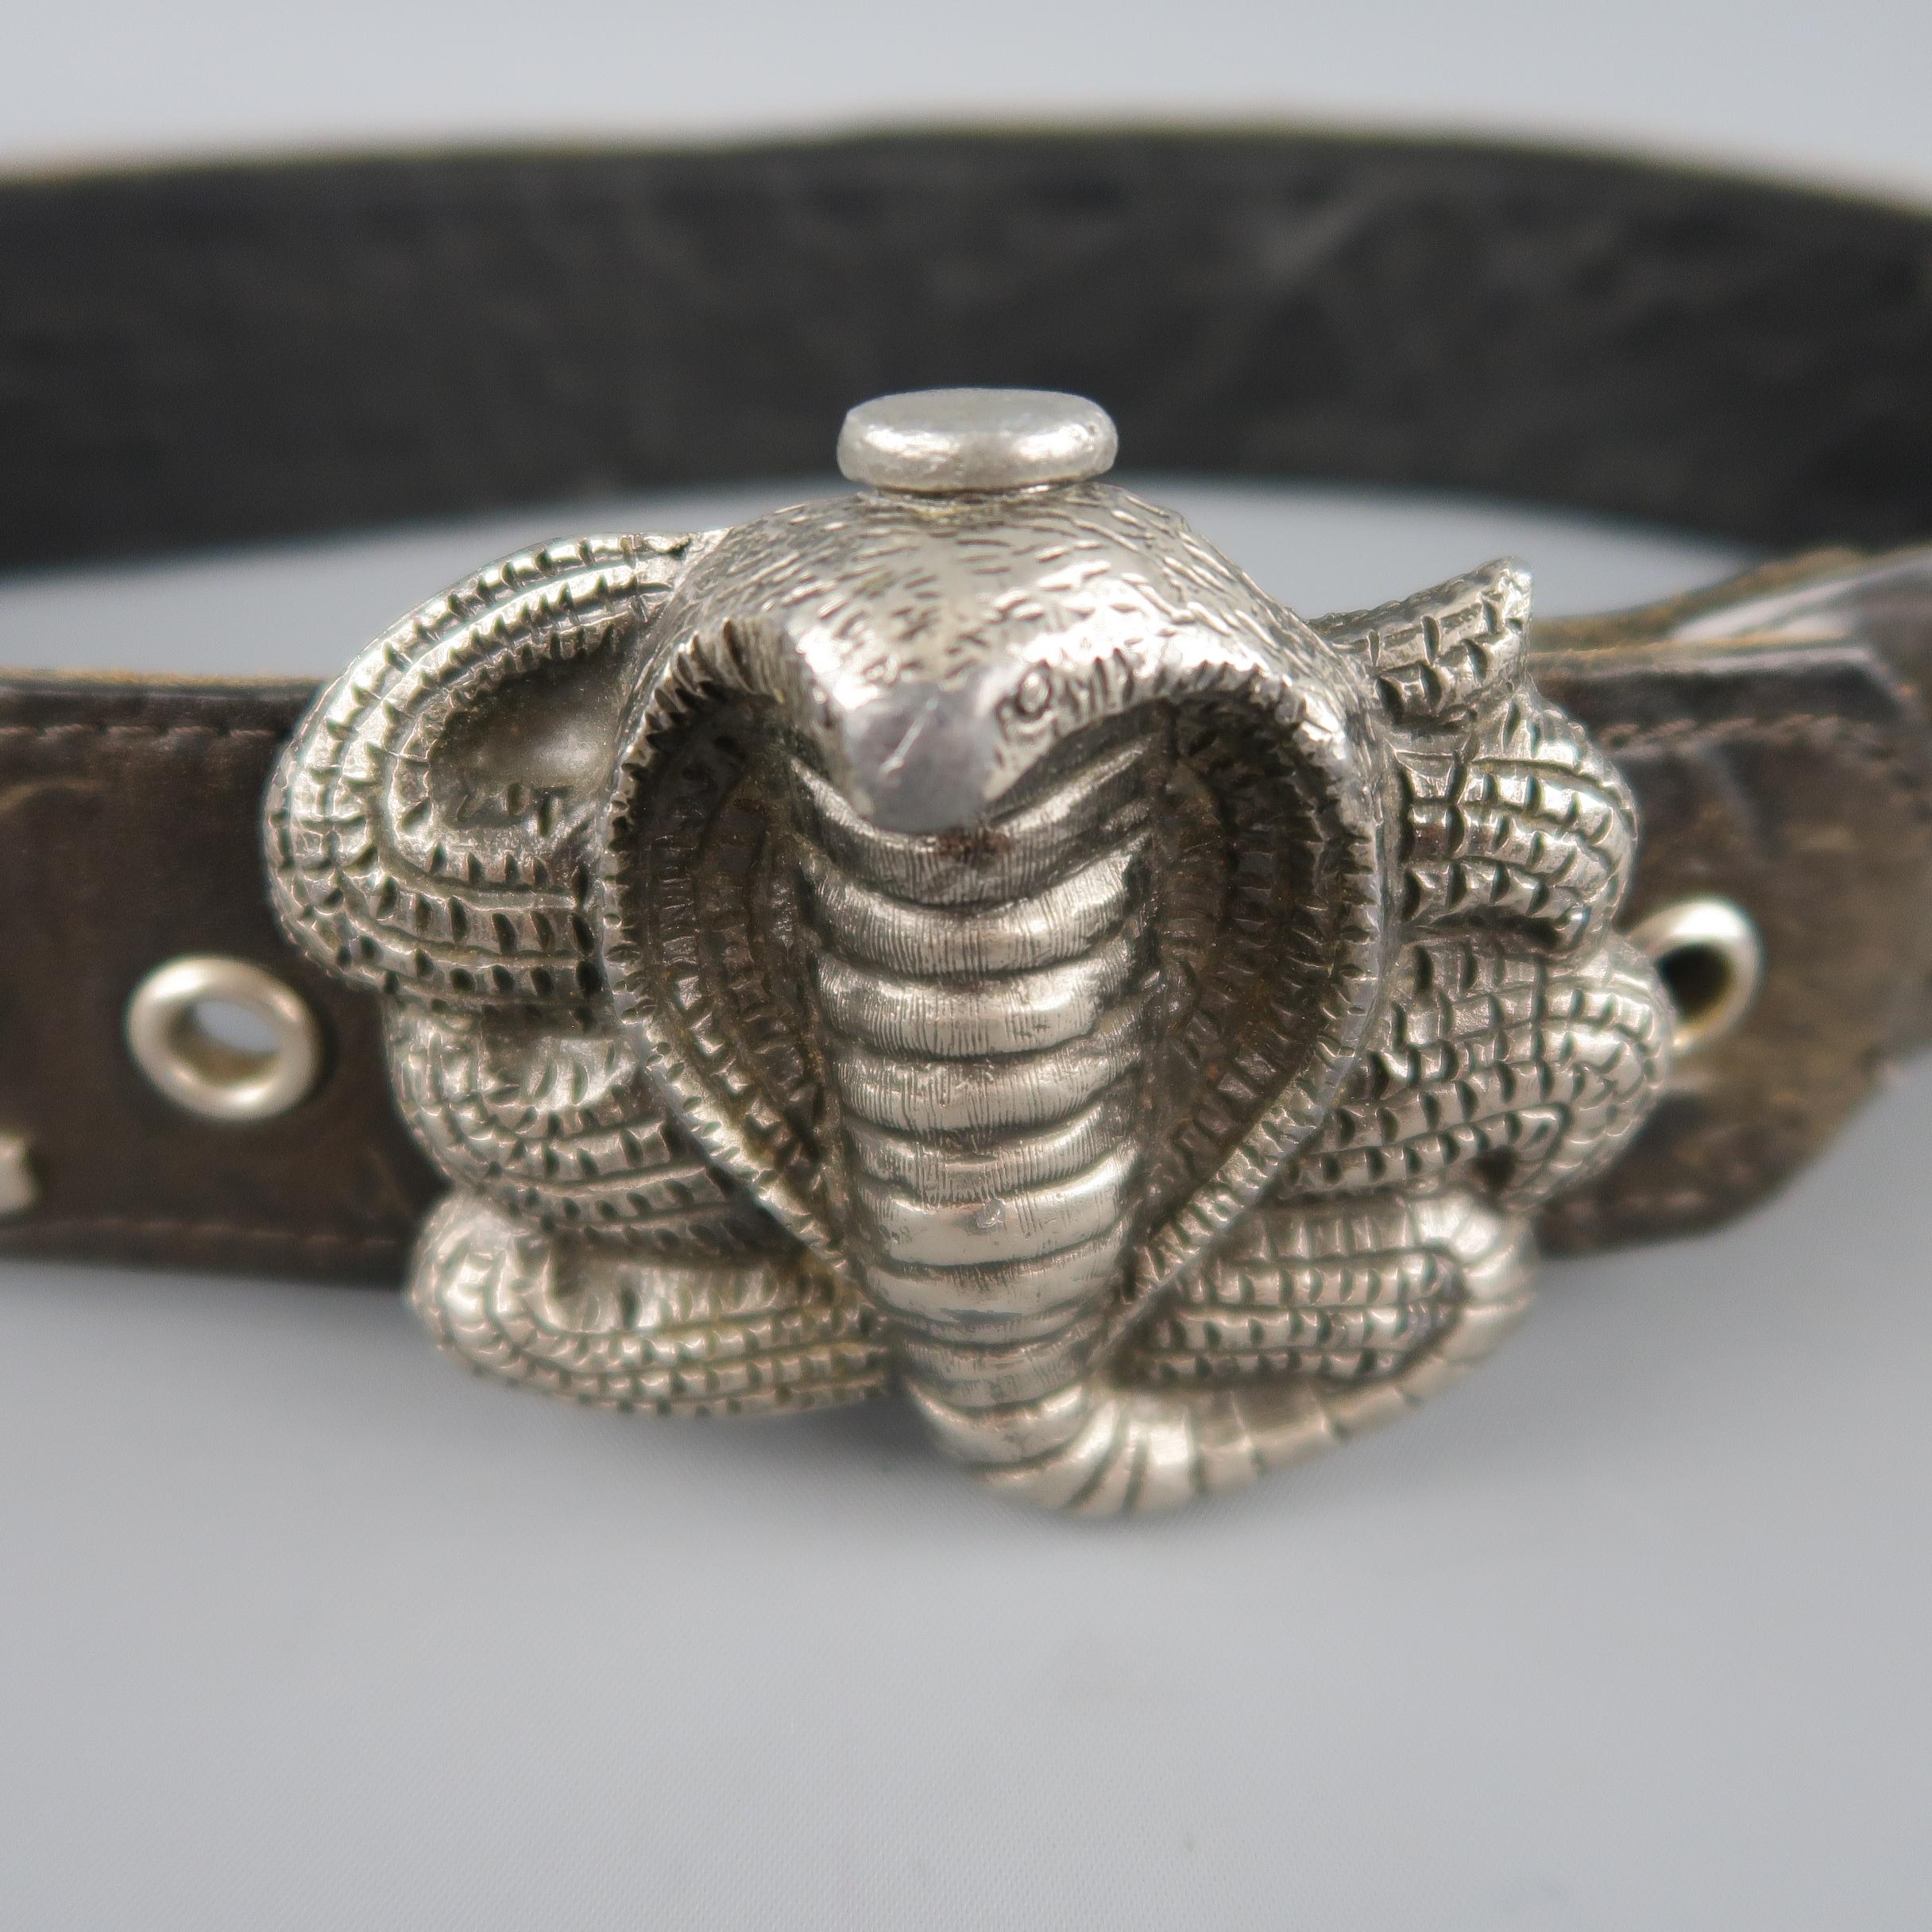 leather belt with cobra buckle